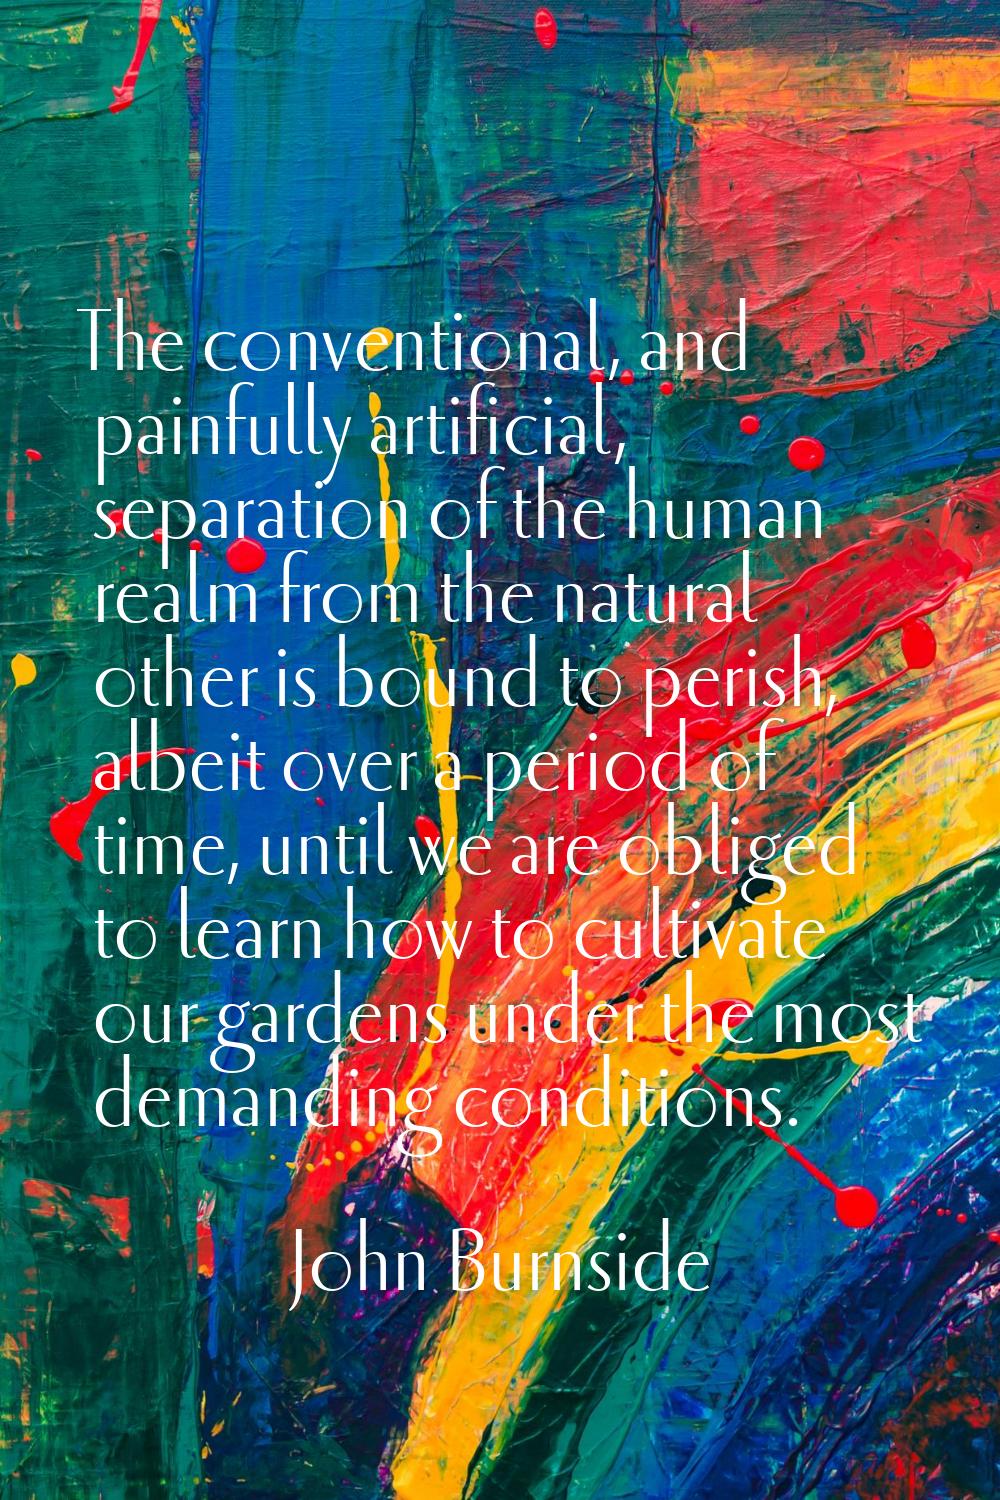 The conventional, and painfully artificial, separation of the human realm from the natural other is